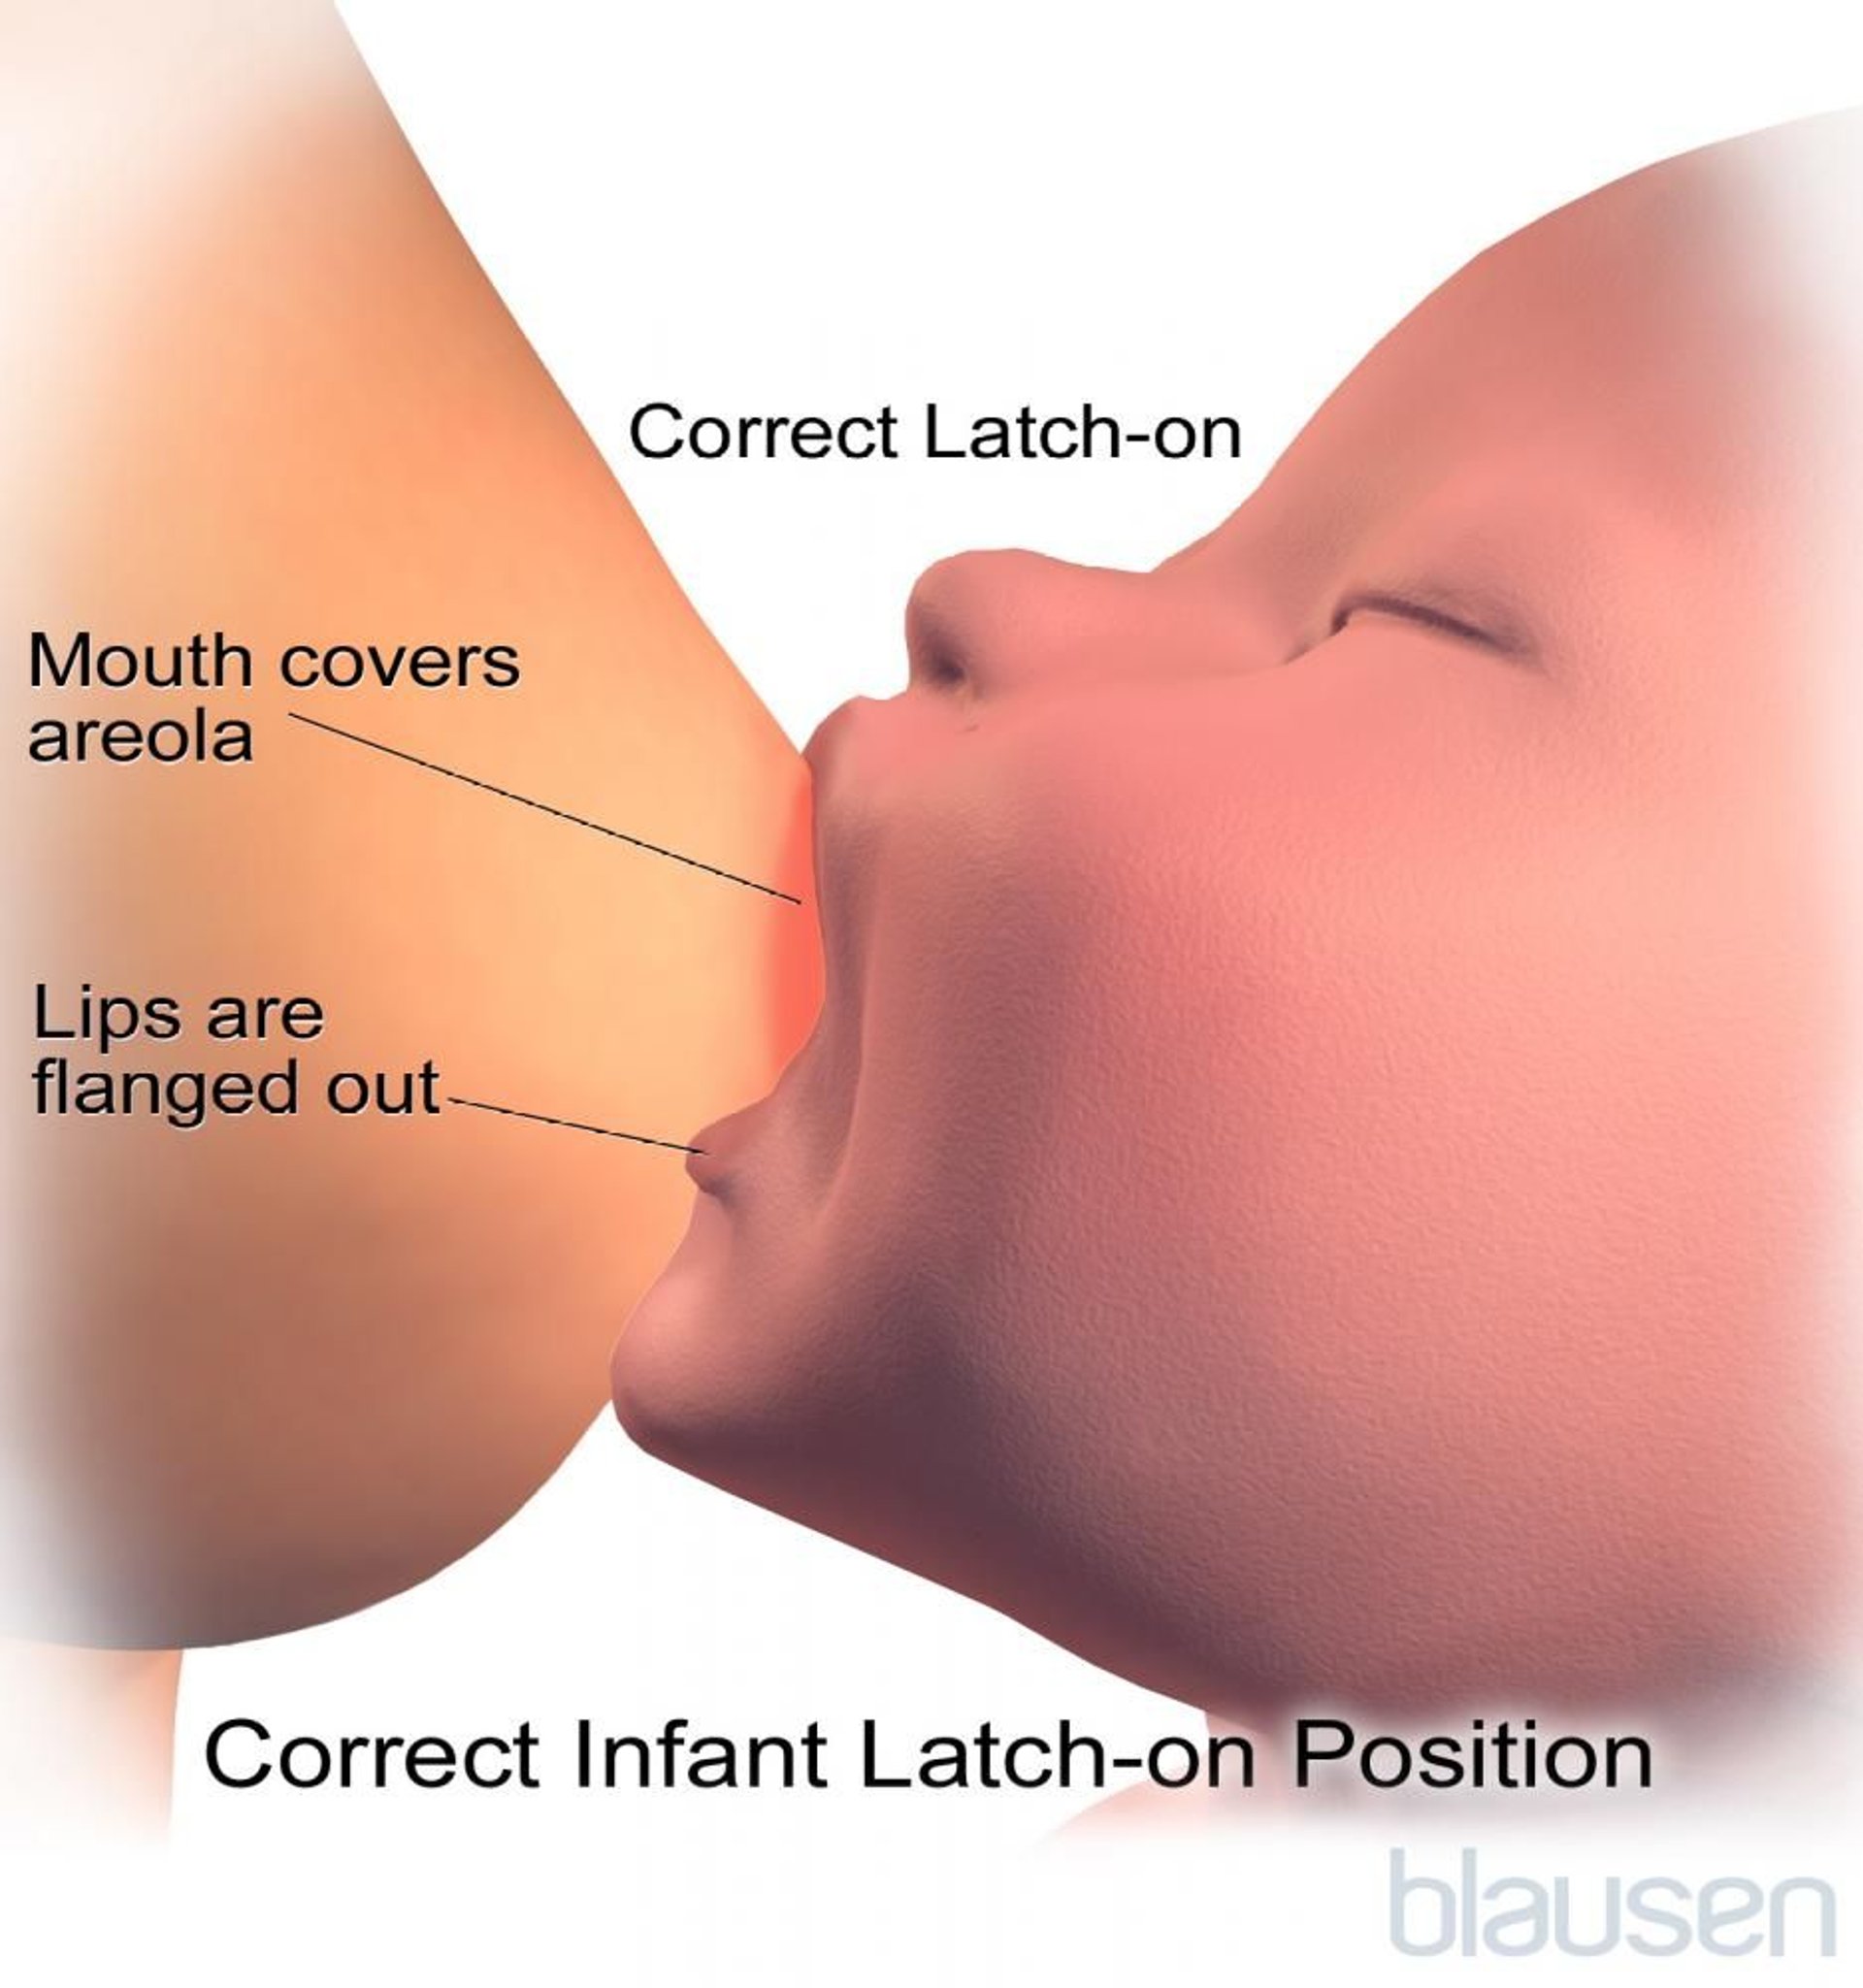 Correct Latch-On Position for Breastfeeding